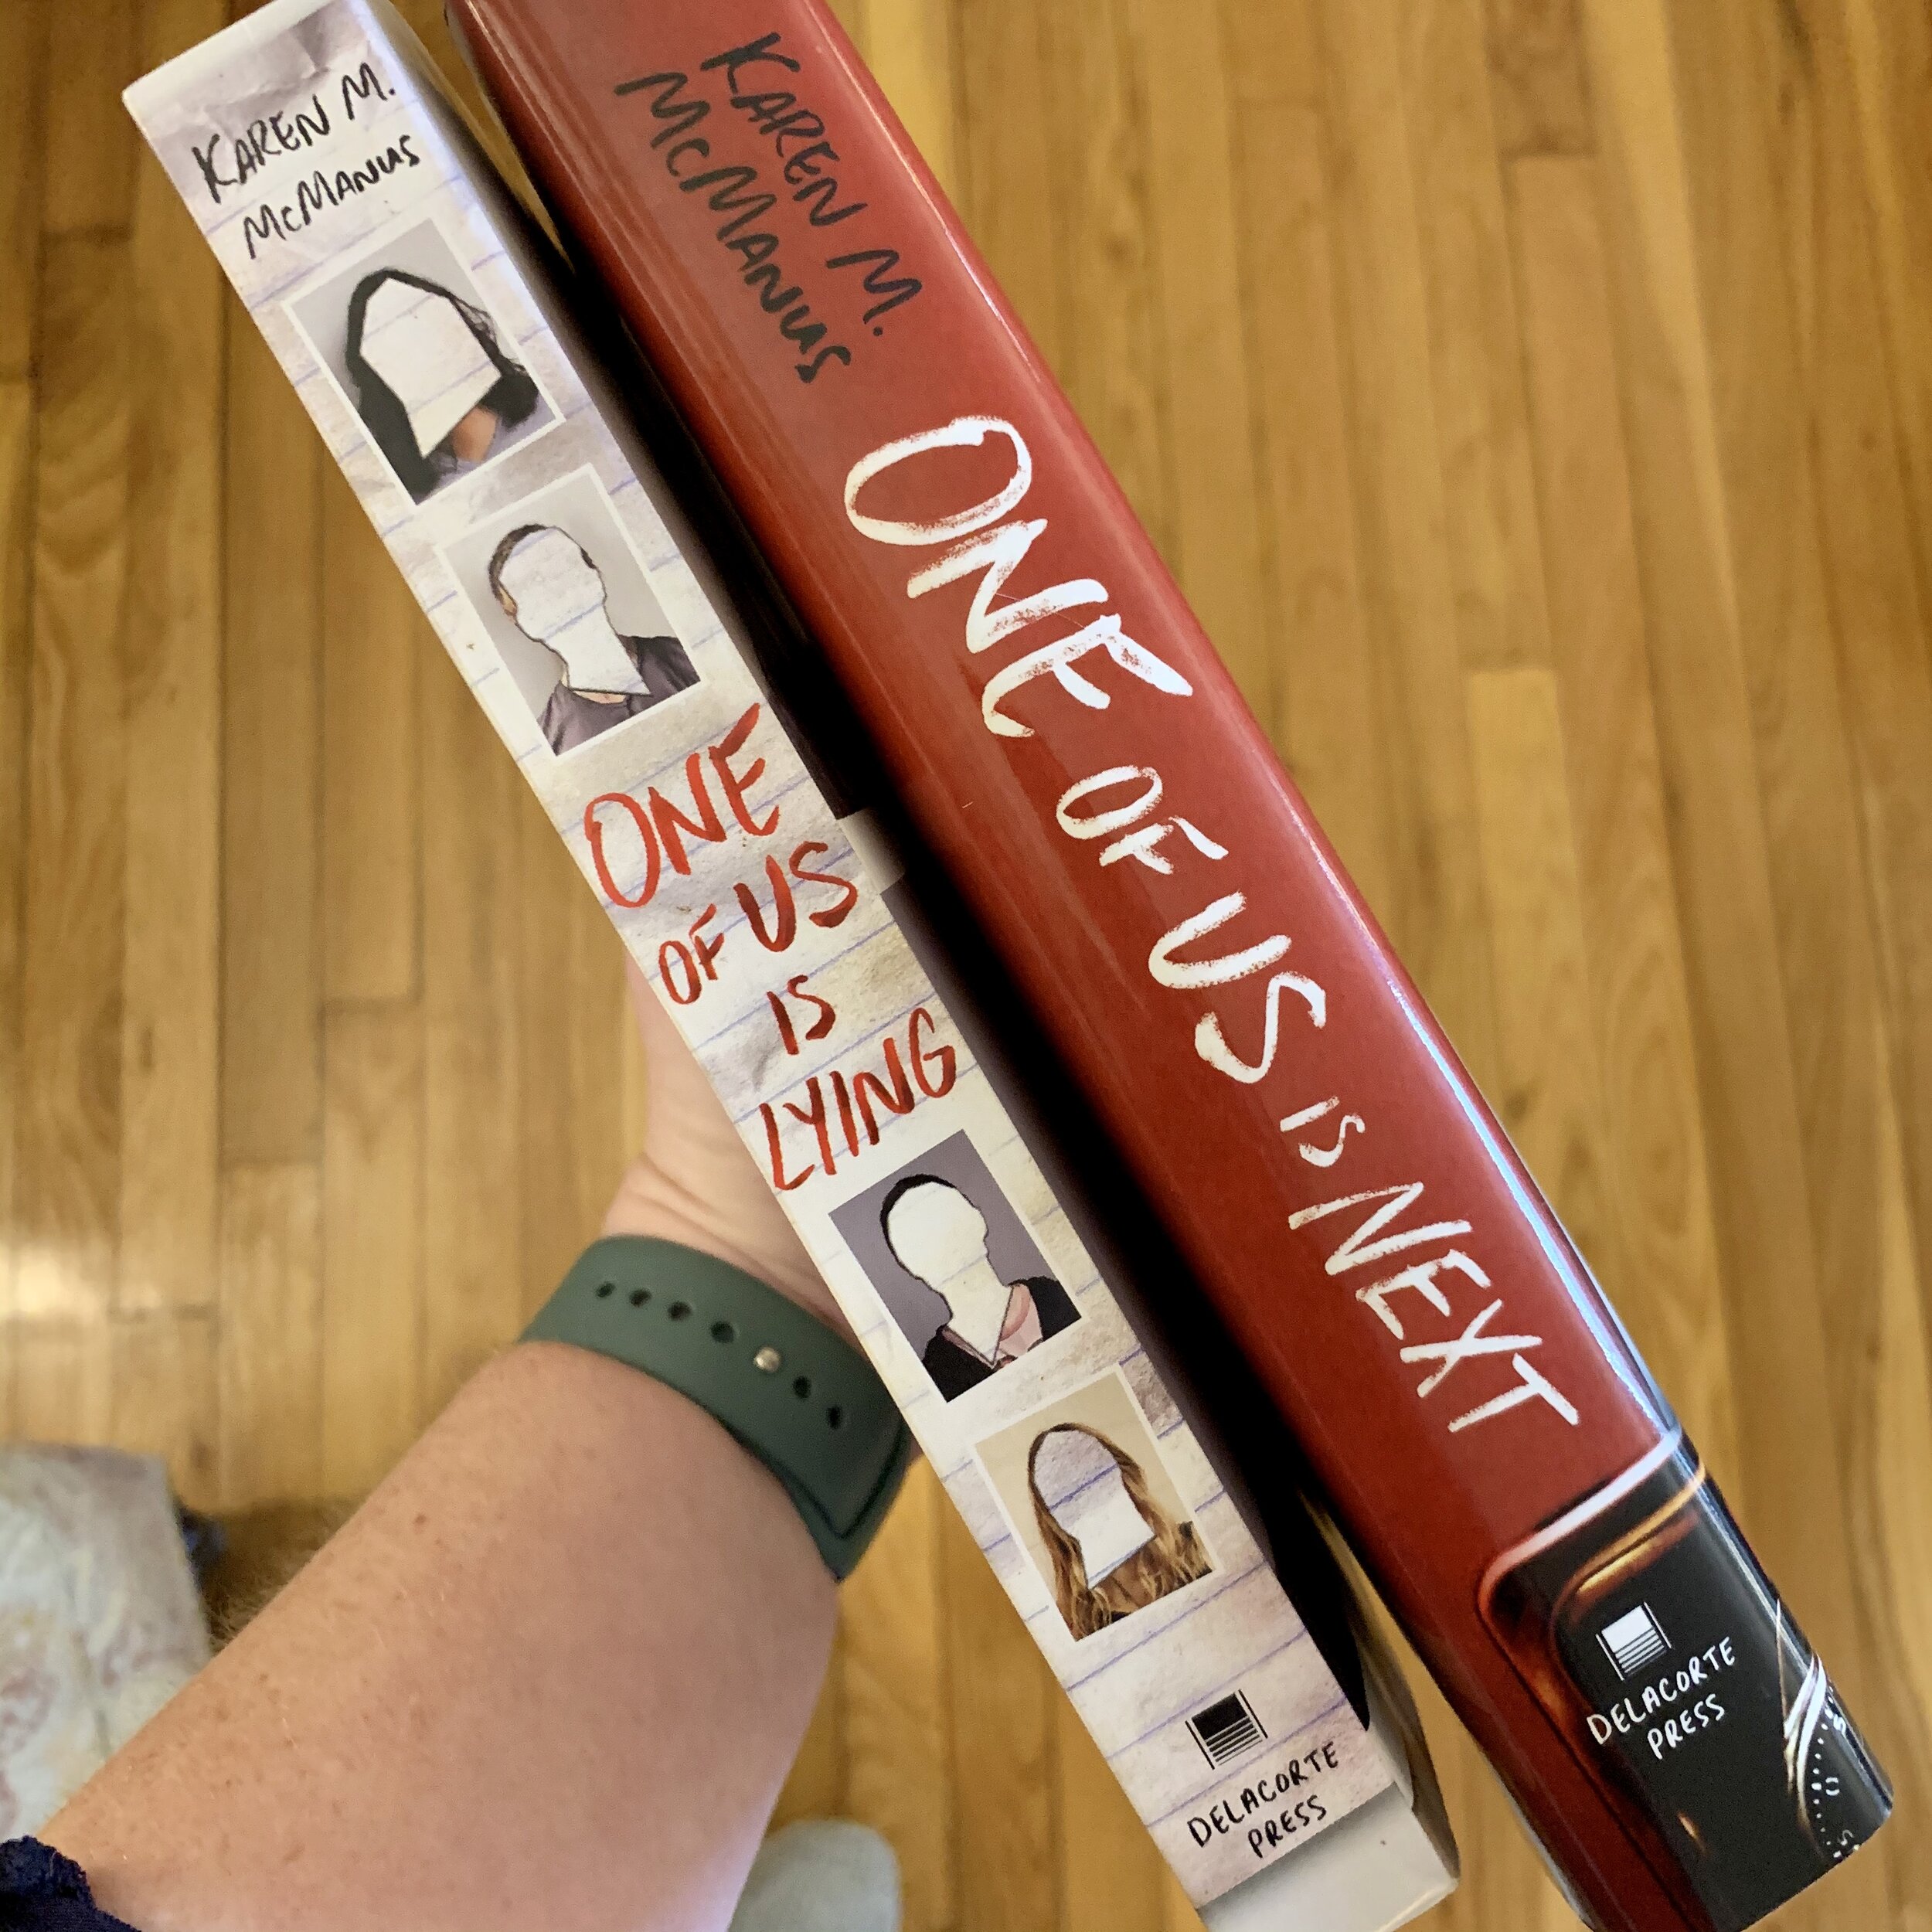 Books Review: "One of Us is Lying" and "One of is Next" by Karen McManus